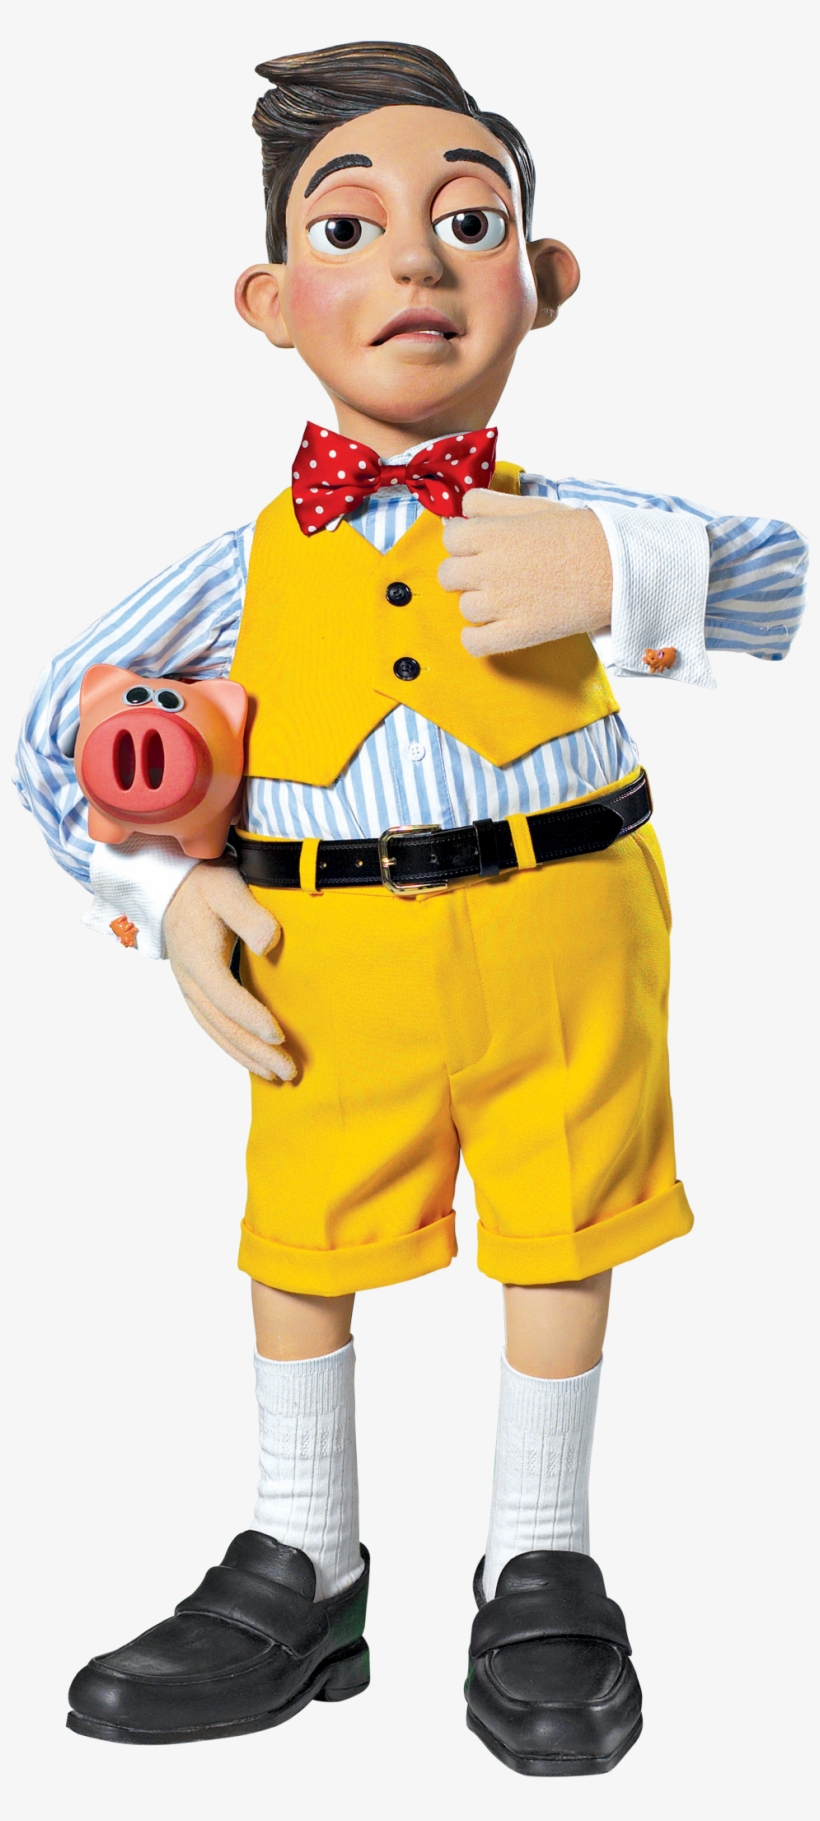 Lazytown Stingy 2 - Lazy Town Stingy Png, transparent png #4254757